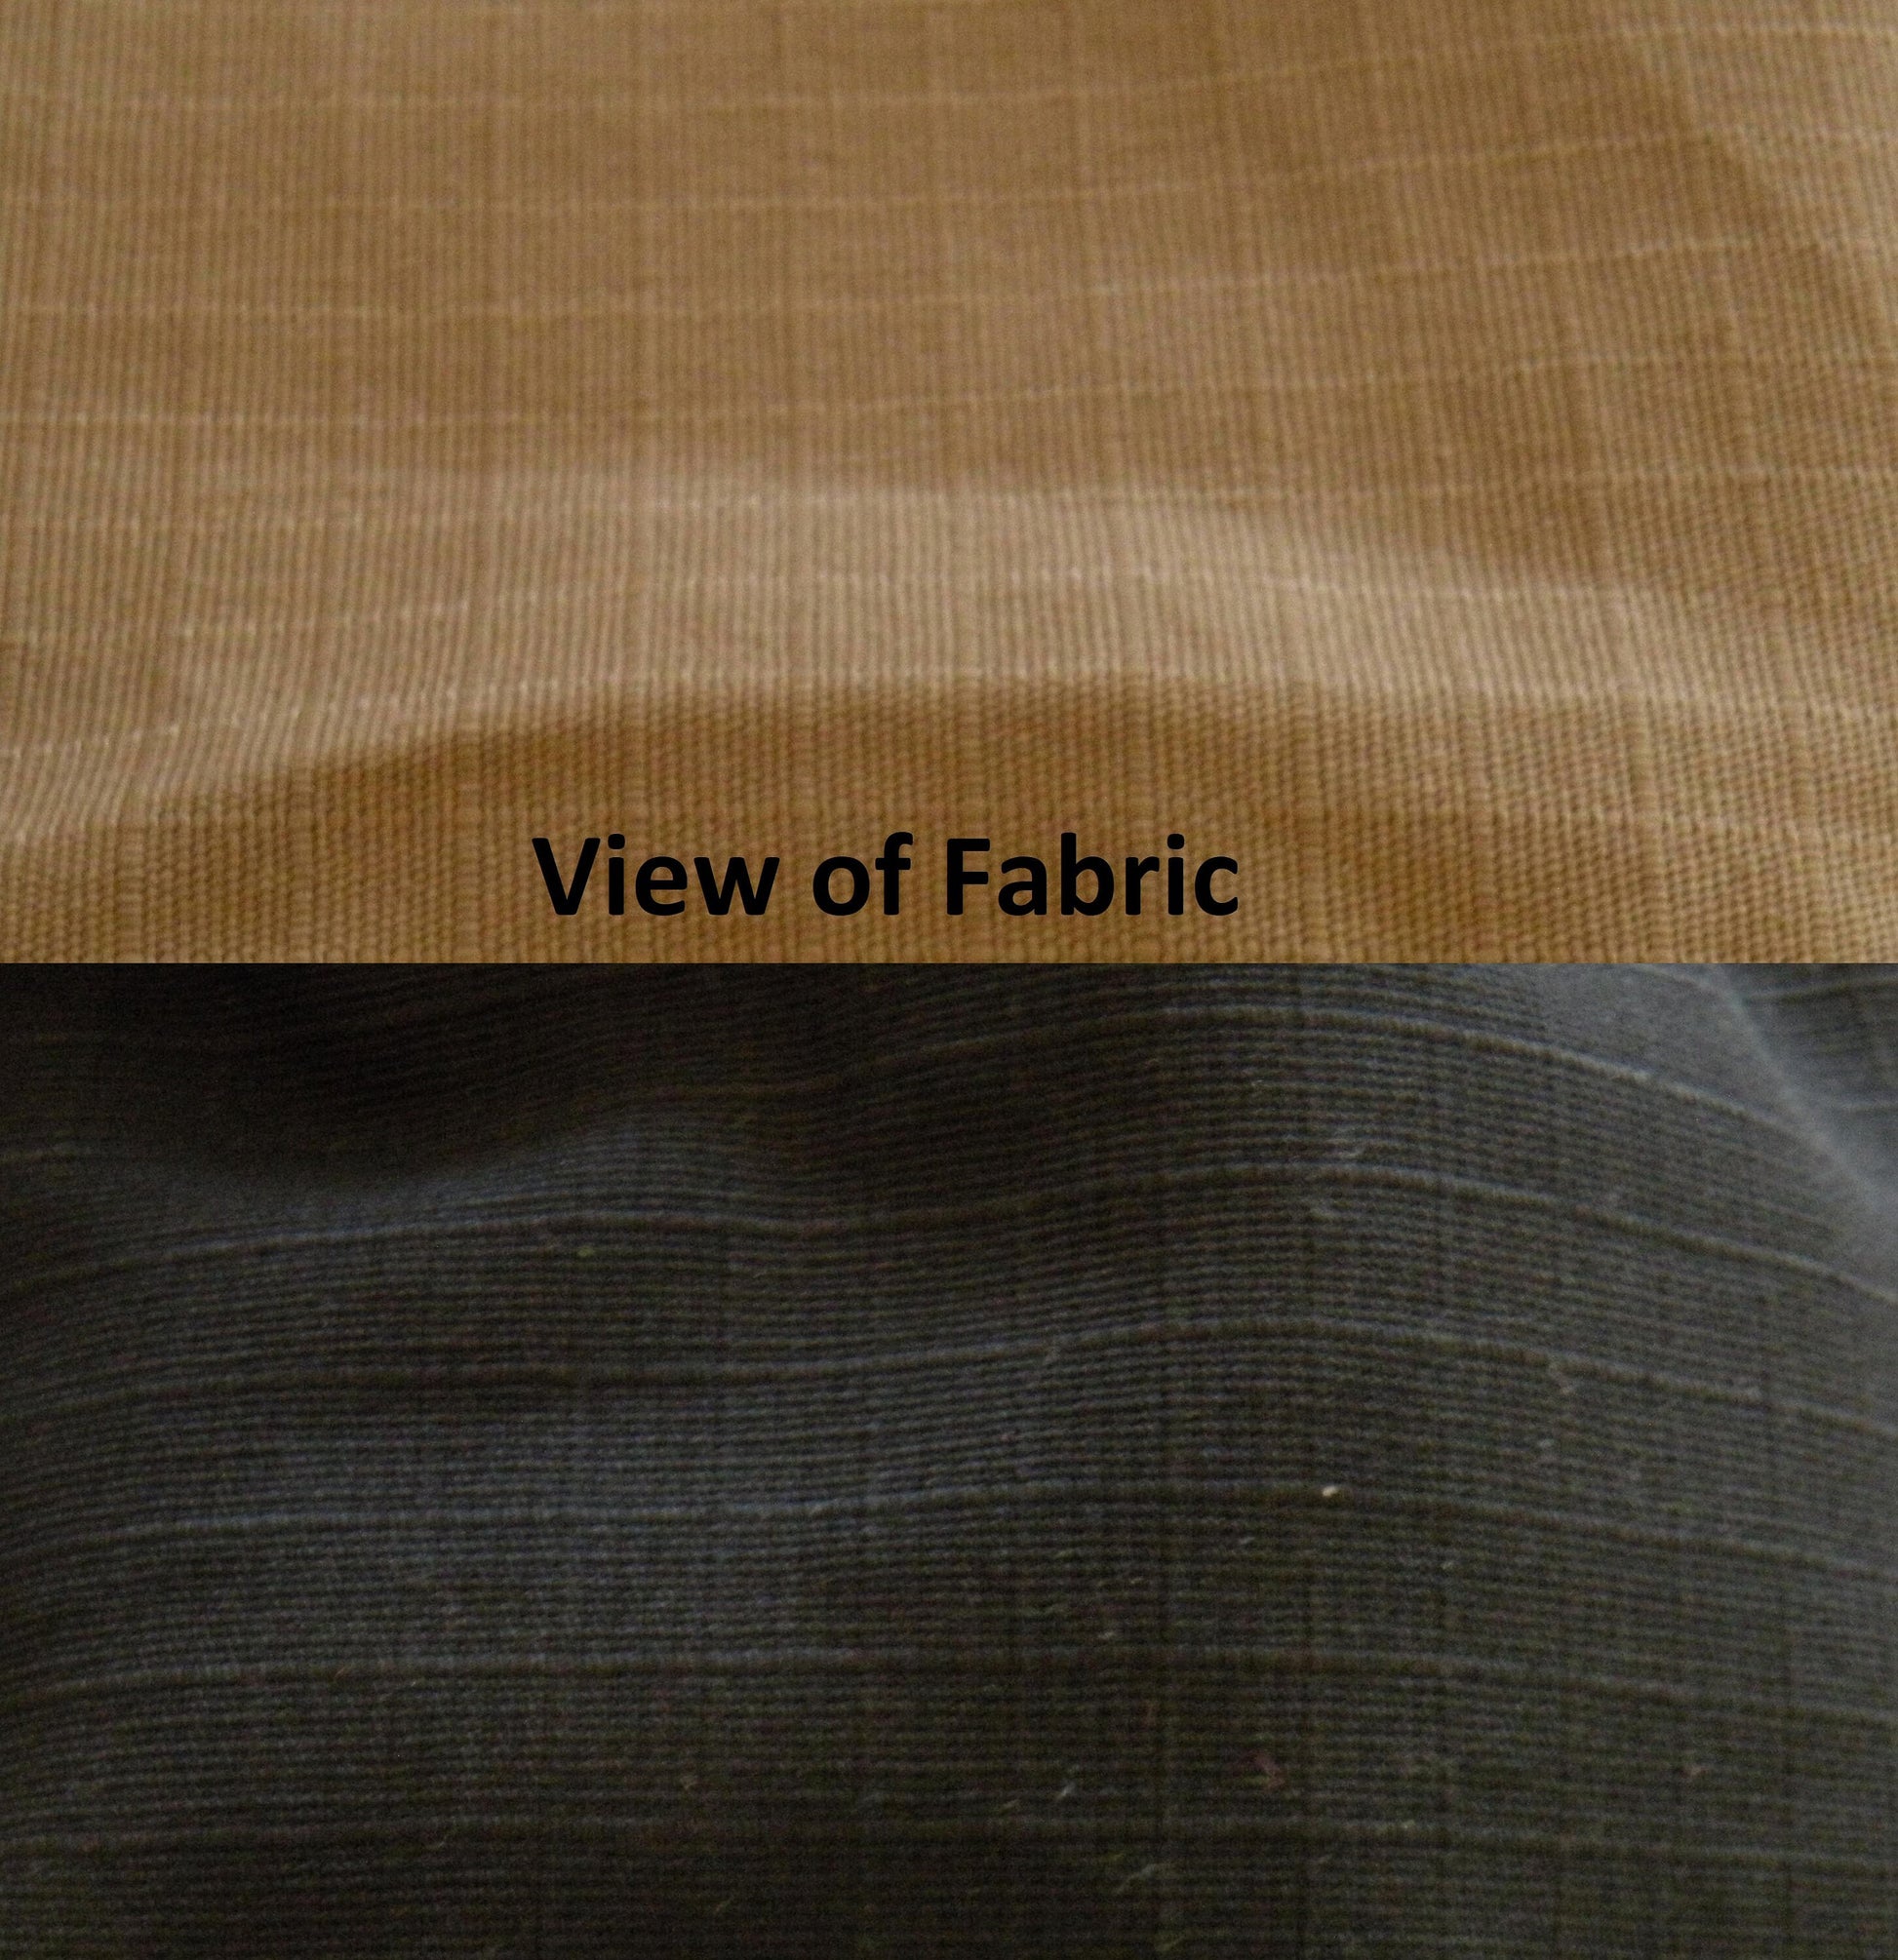 view of fabric 100% cotton ripstop